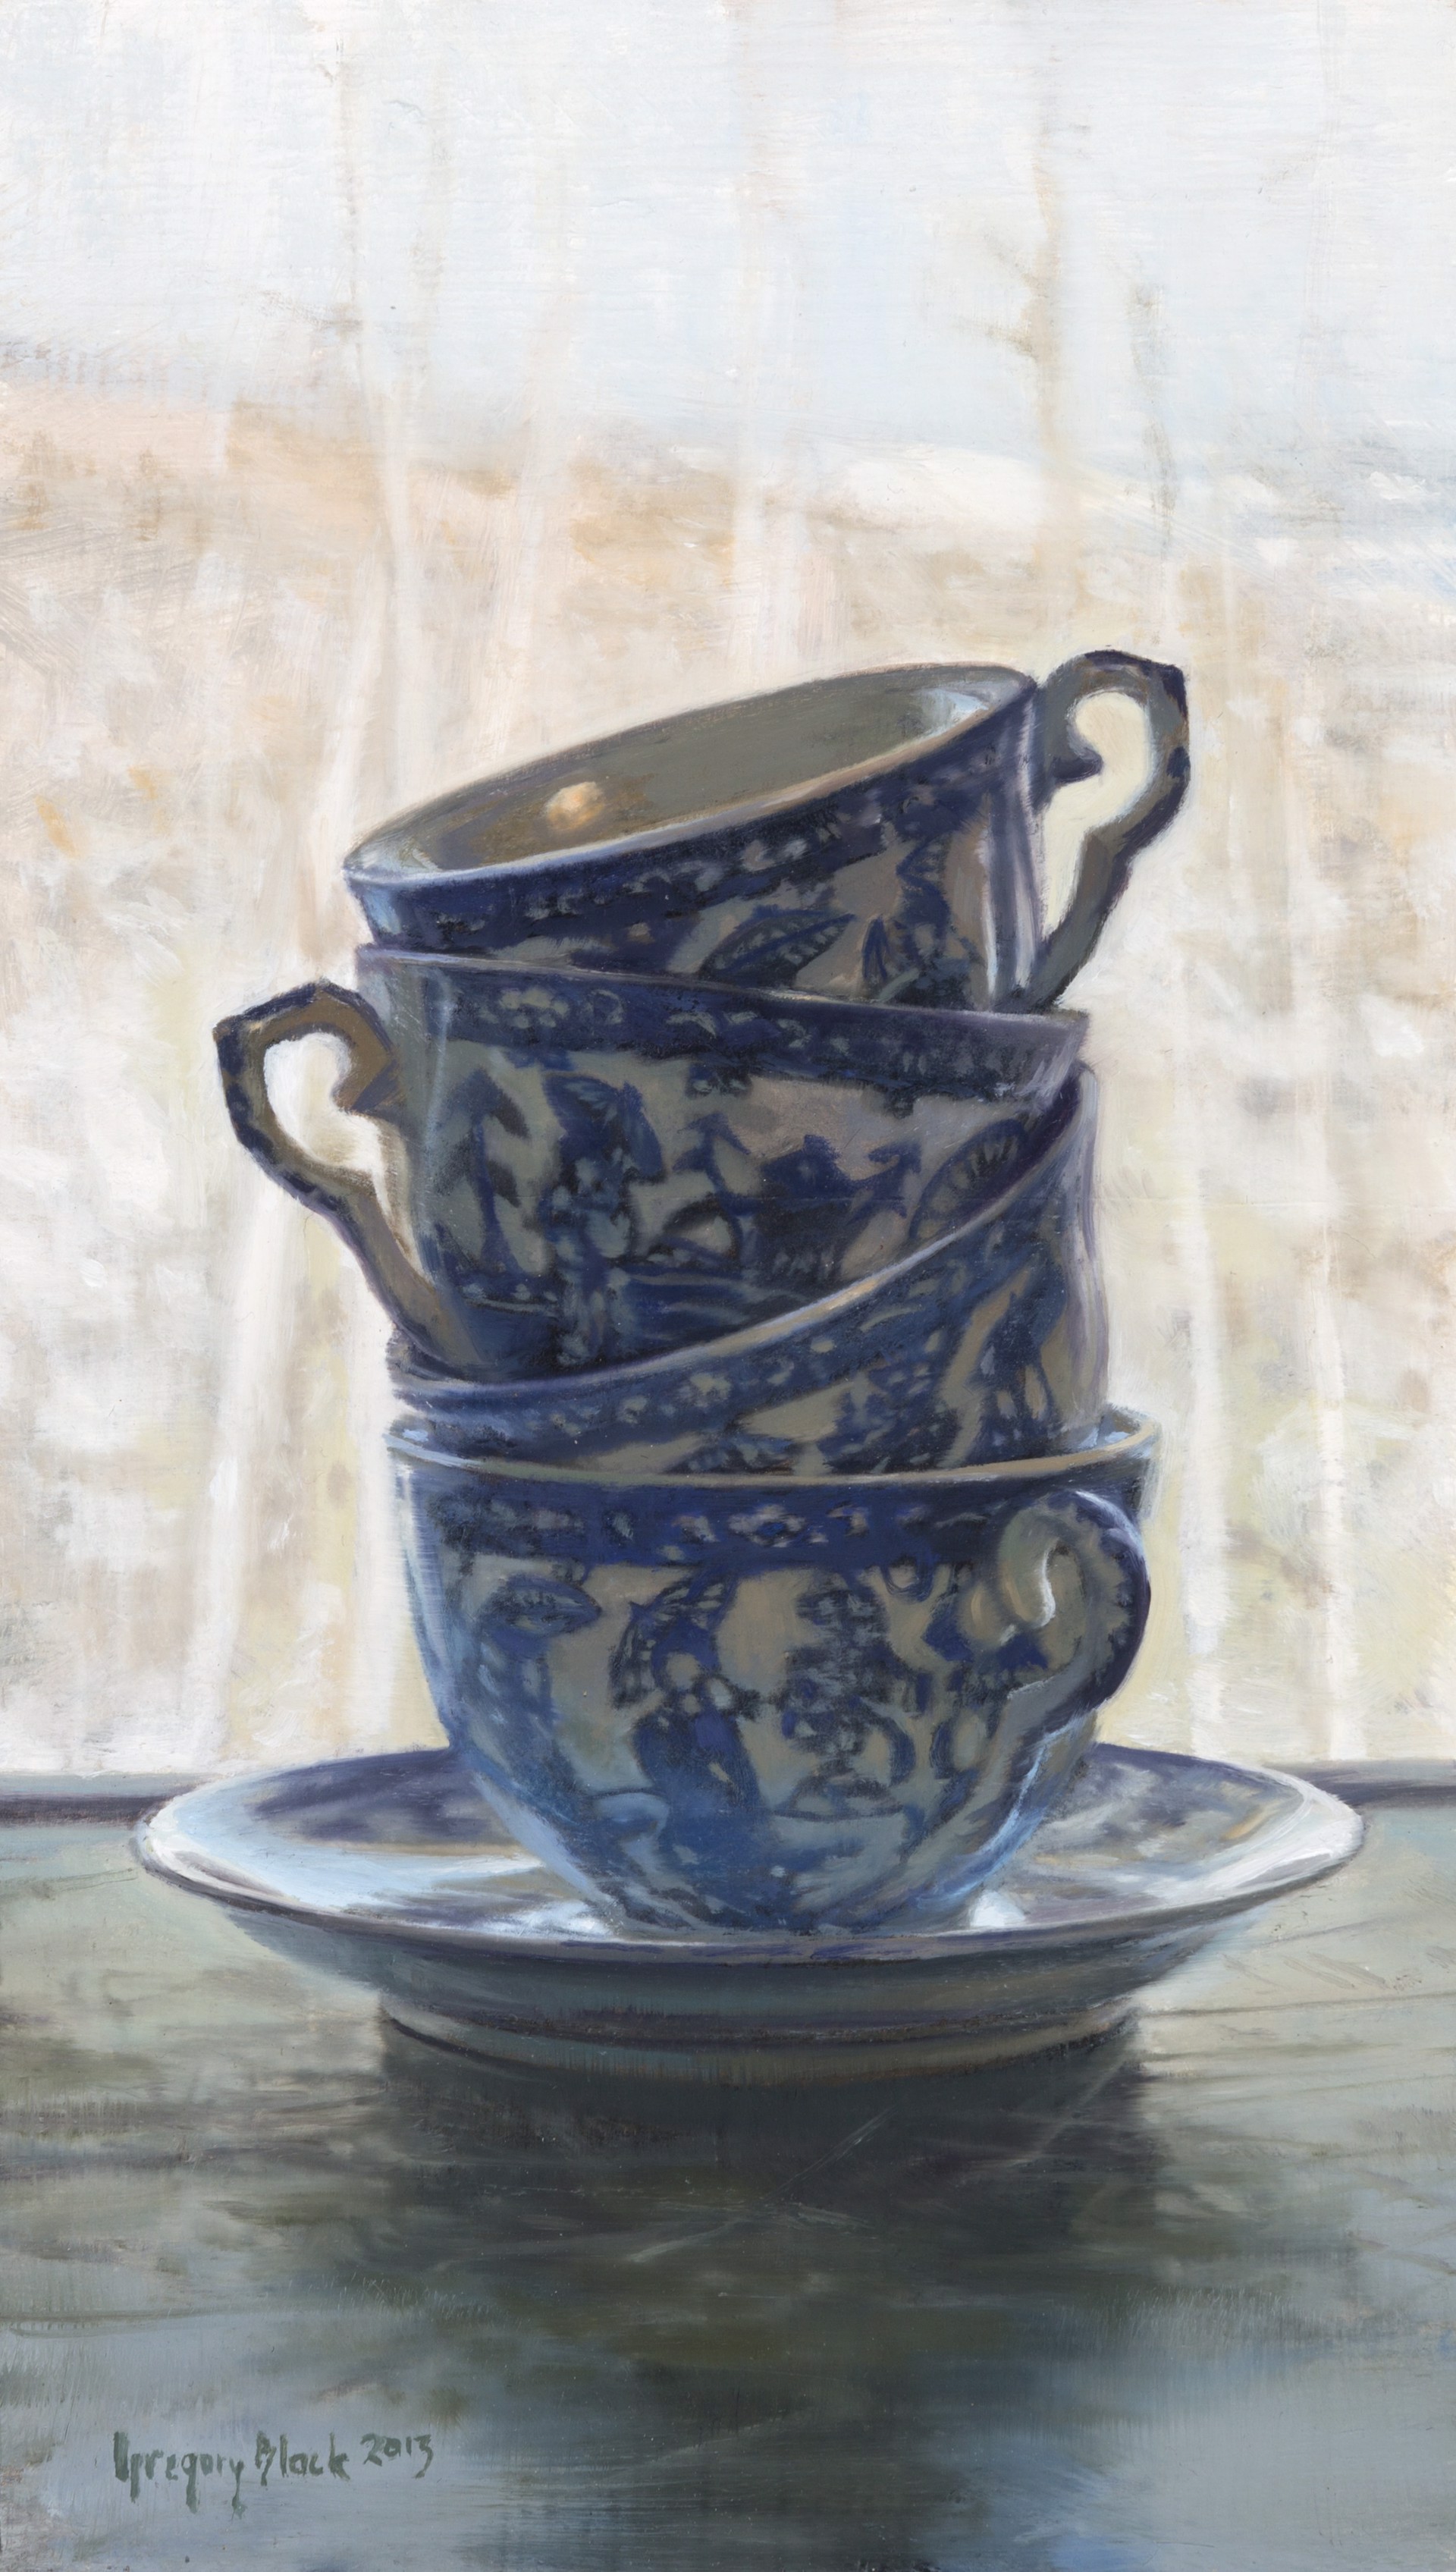 Teacups by Gregory Block